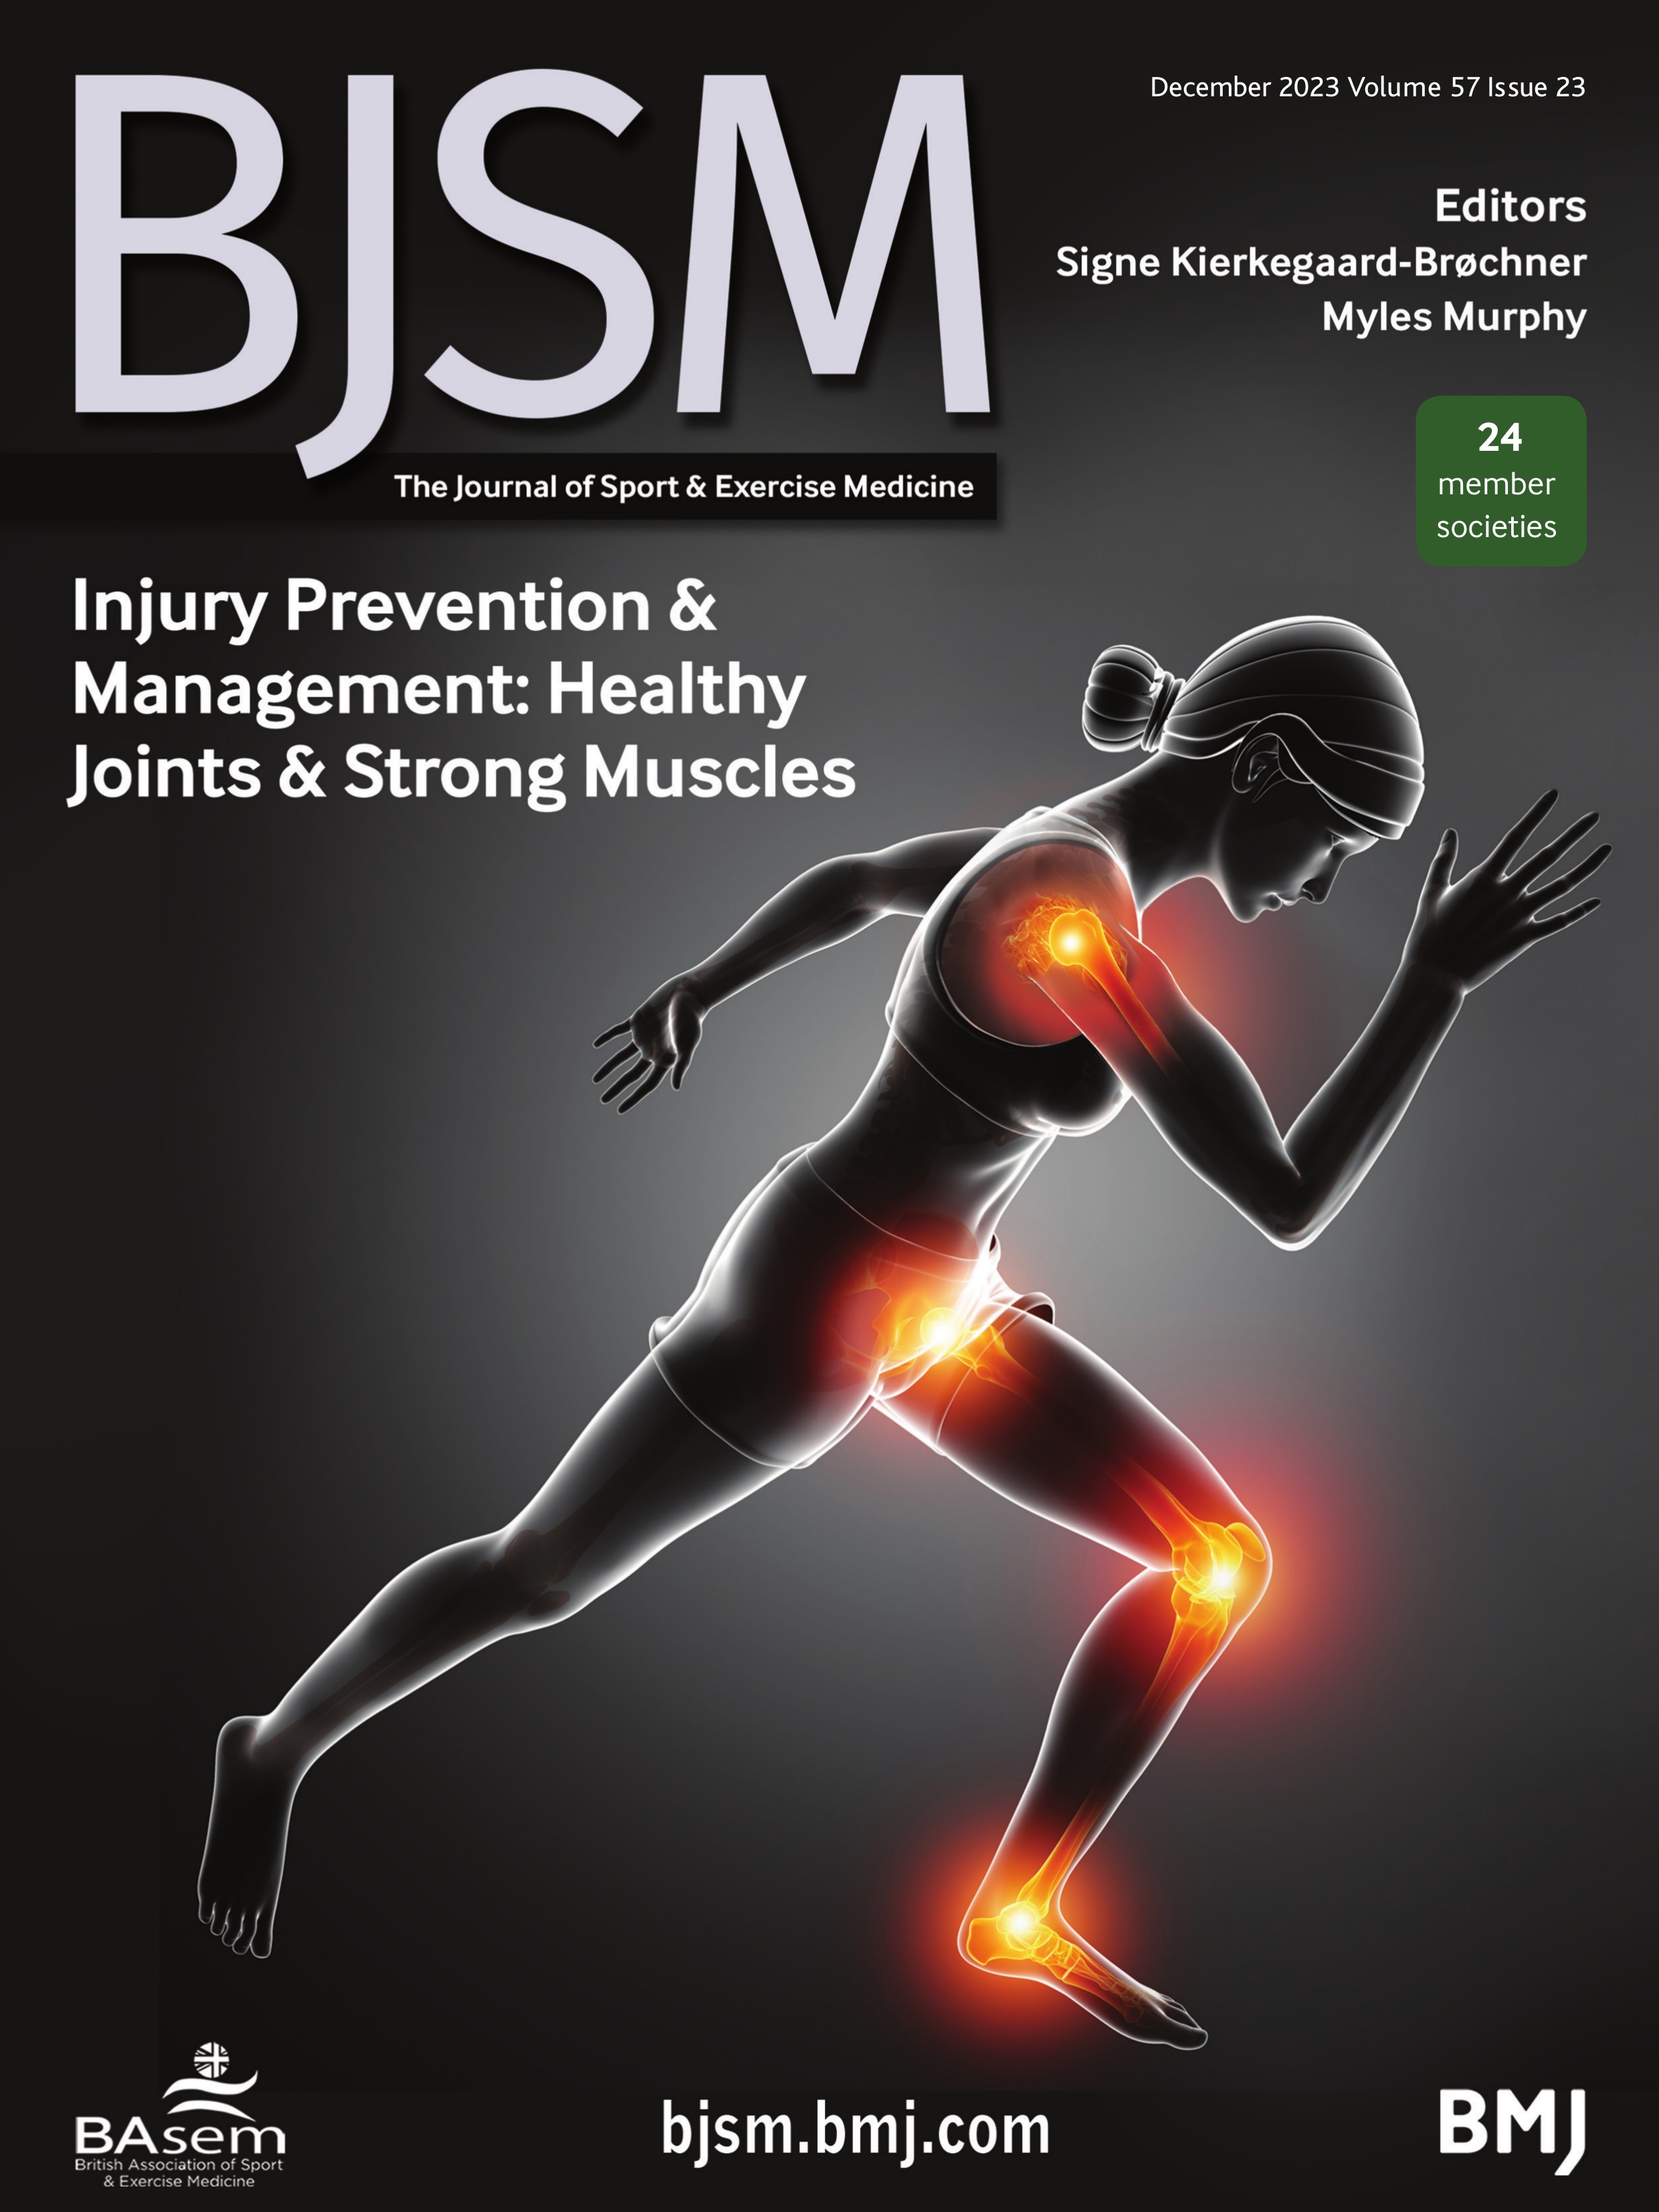 Injury prevention and management--healthy joints and strong muscles